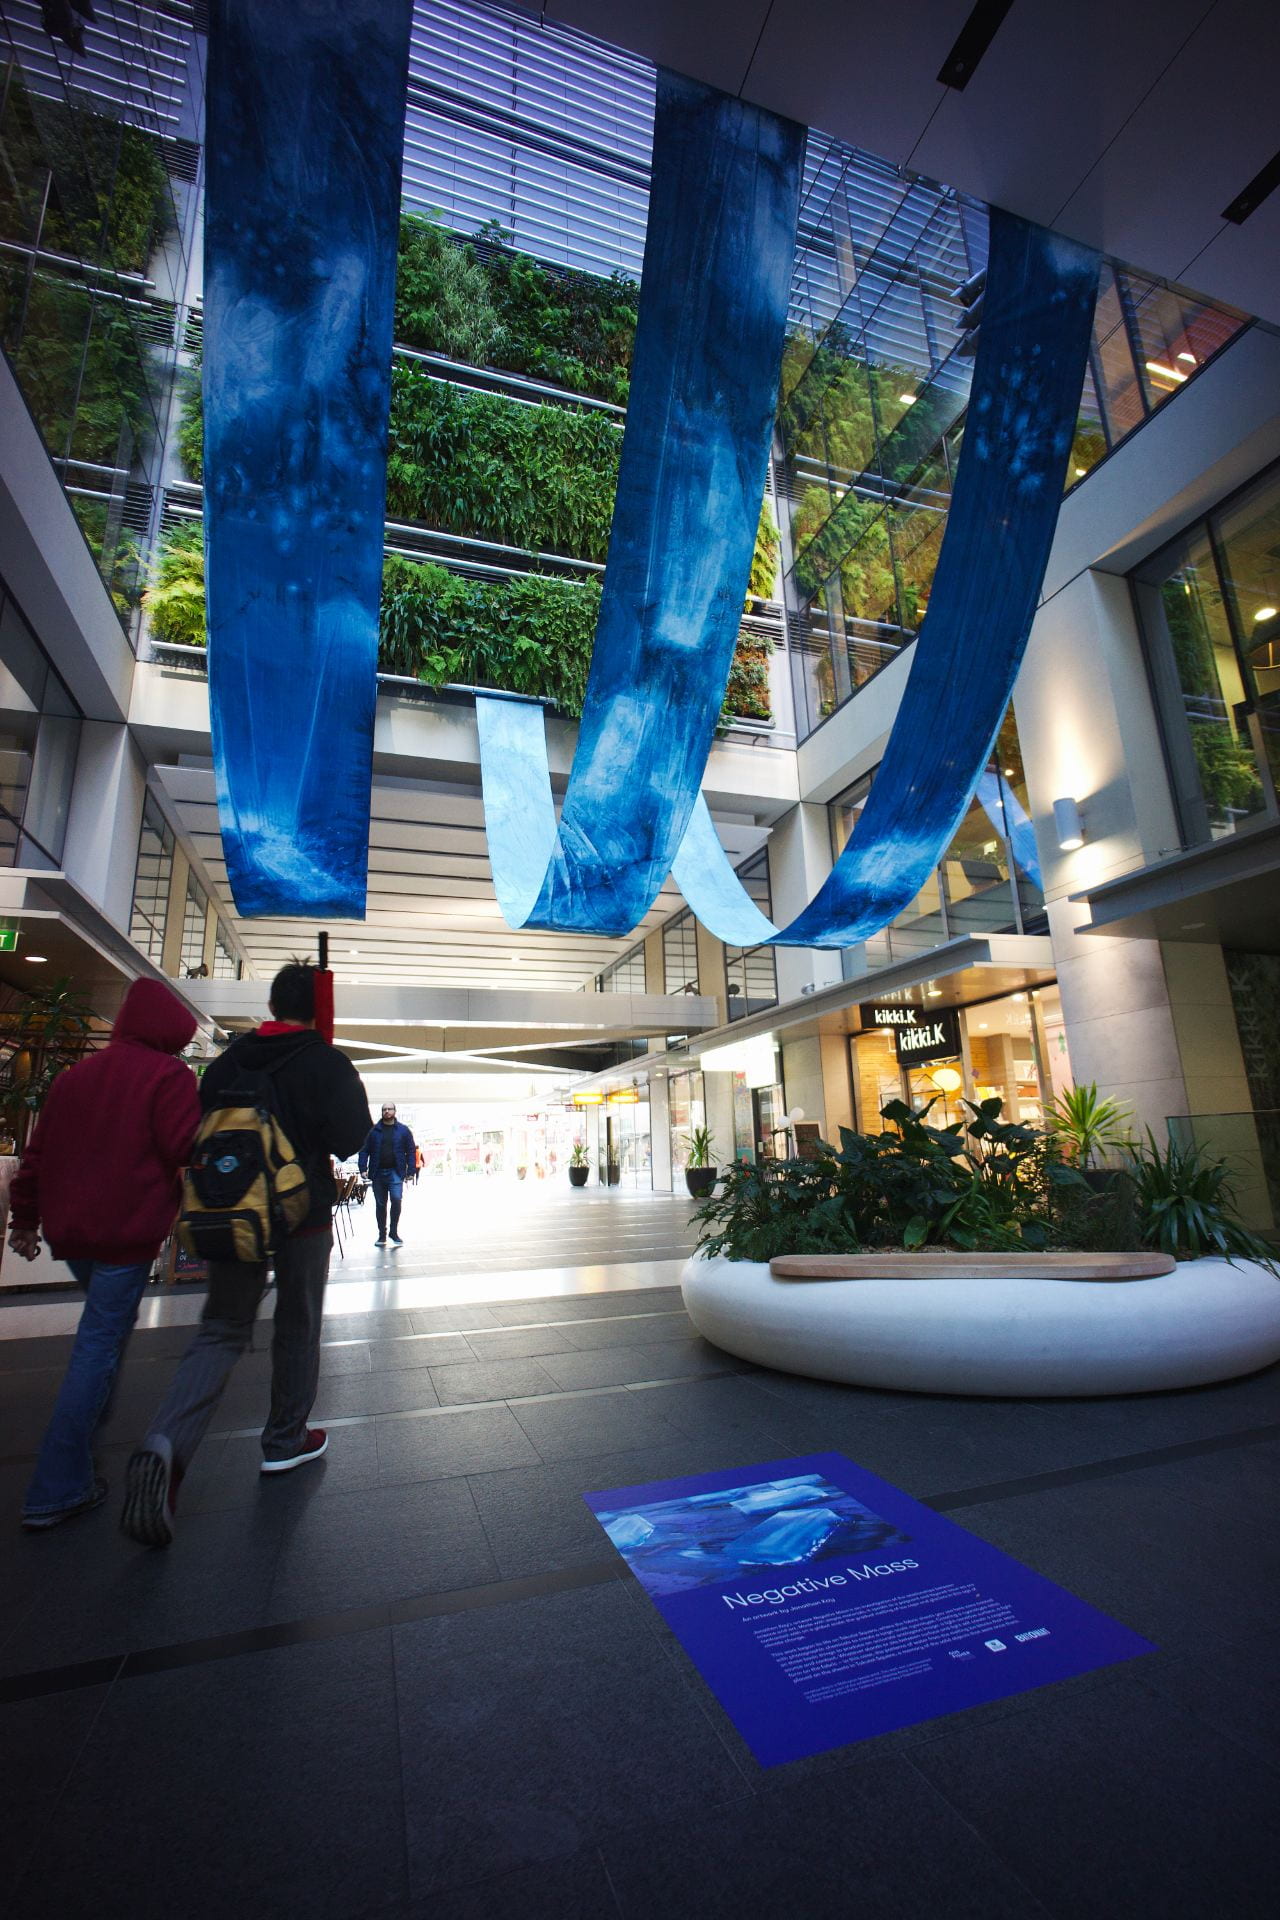 Three long, narrow strips of cloth hang in U-shapes in the courtyard of an inner-city building. A living plant wall can be seen in the background.